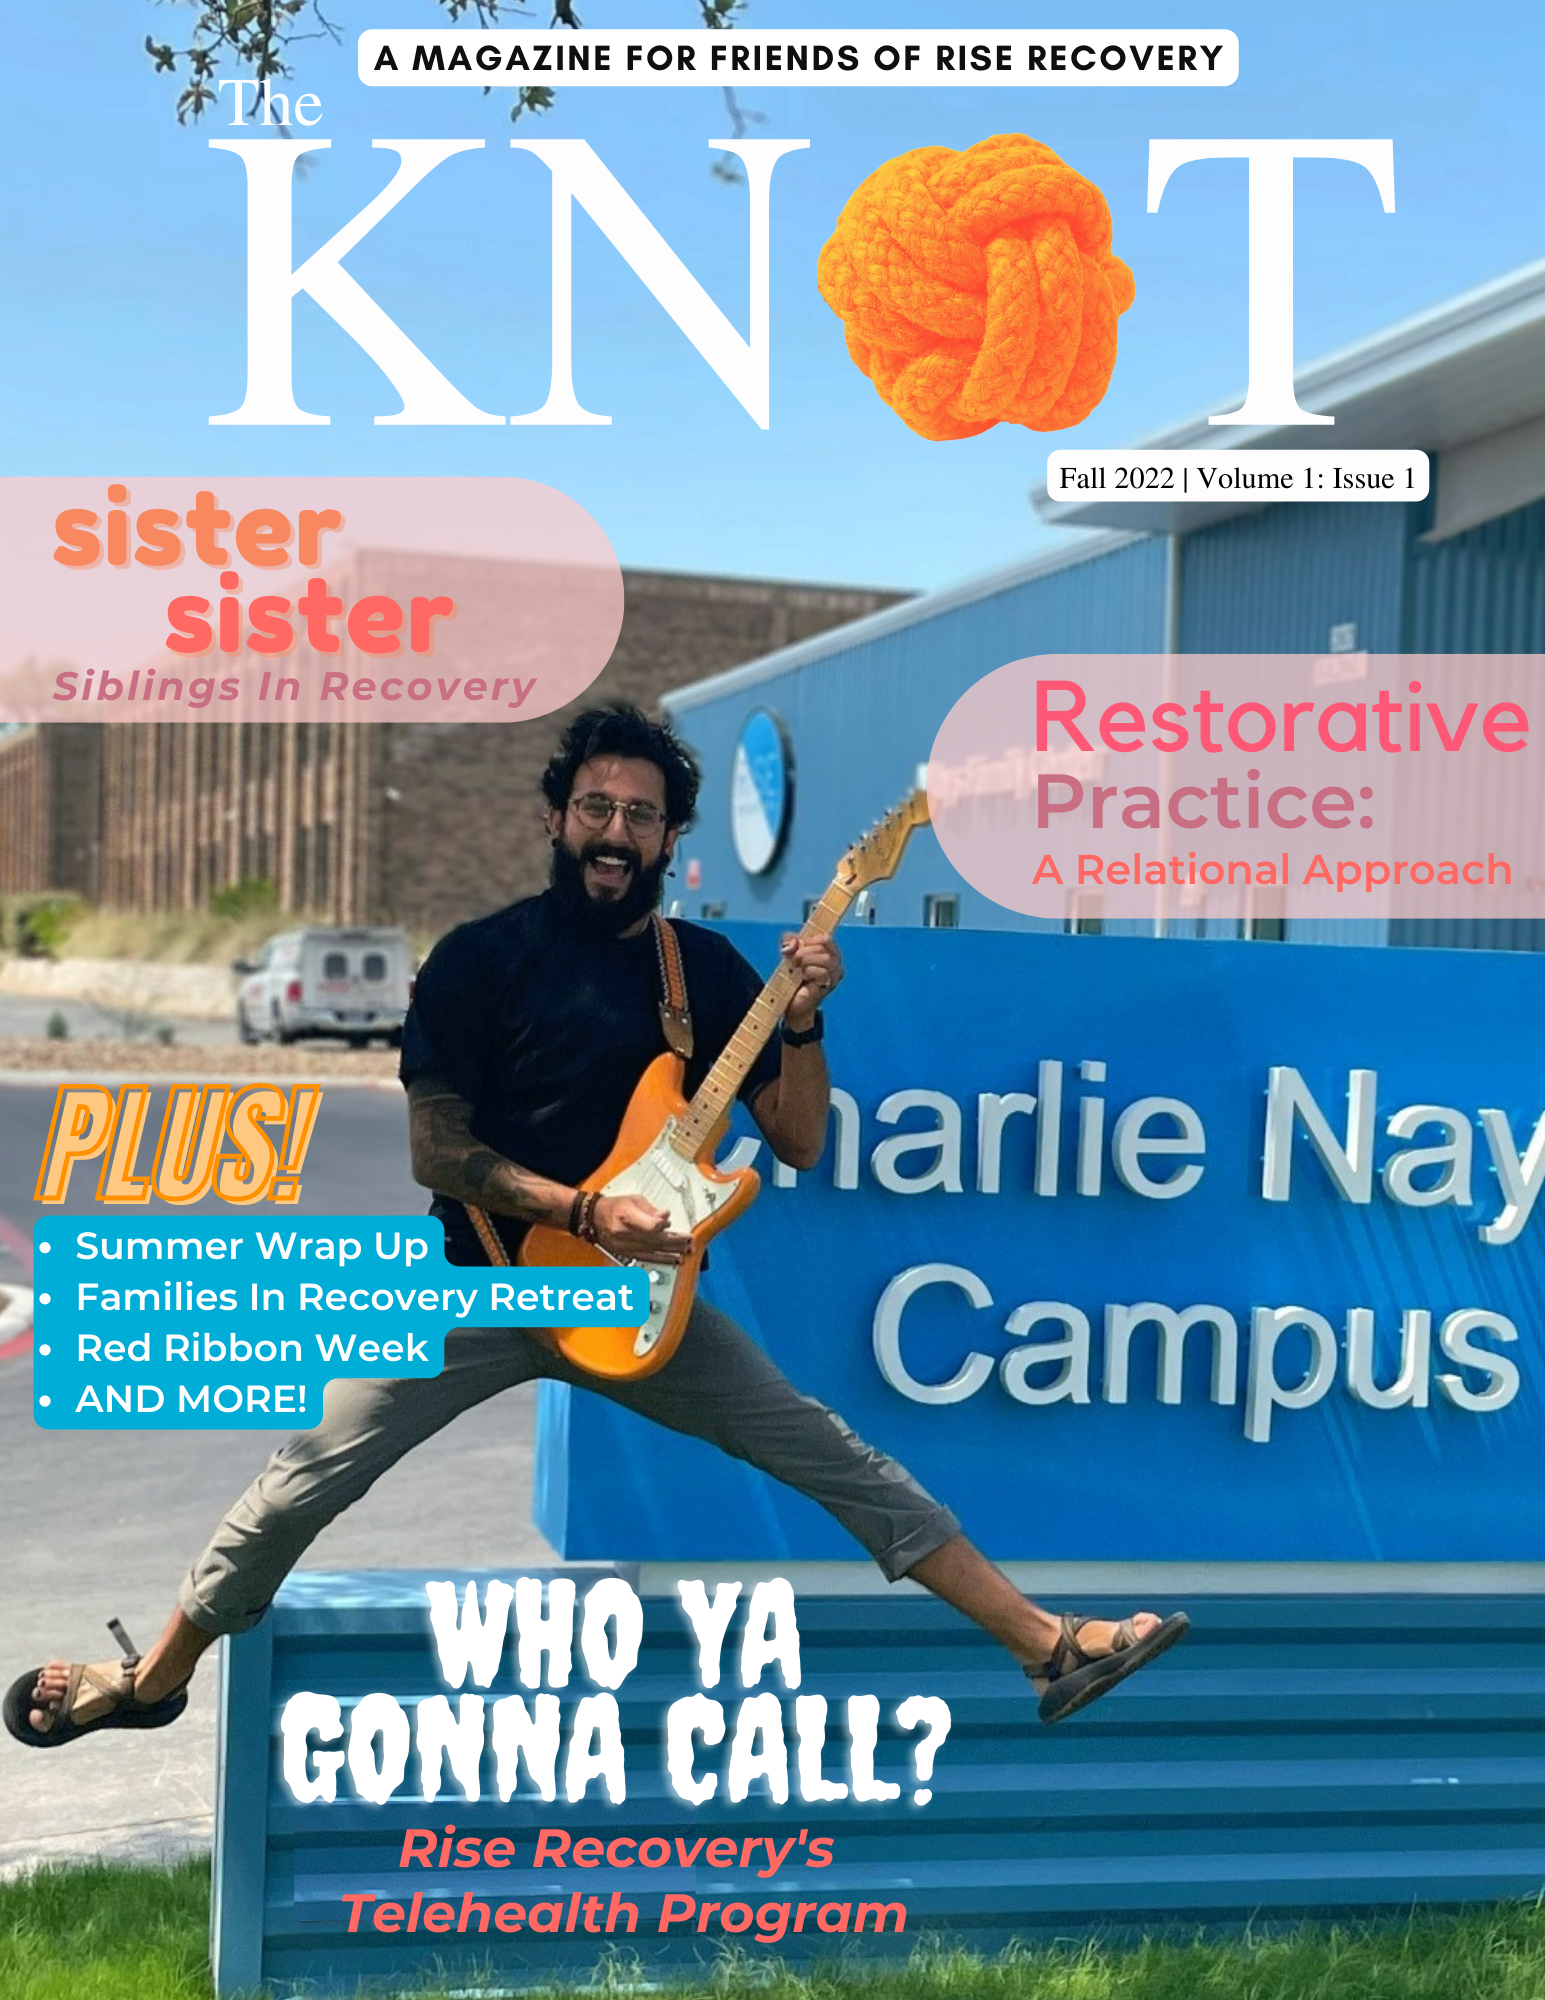 The Knot: Volume 1 Issue 1